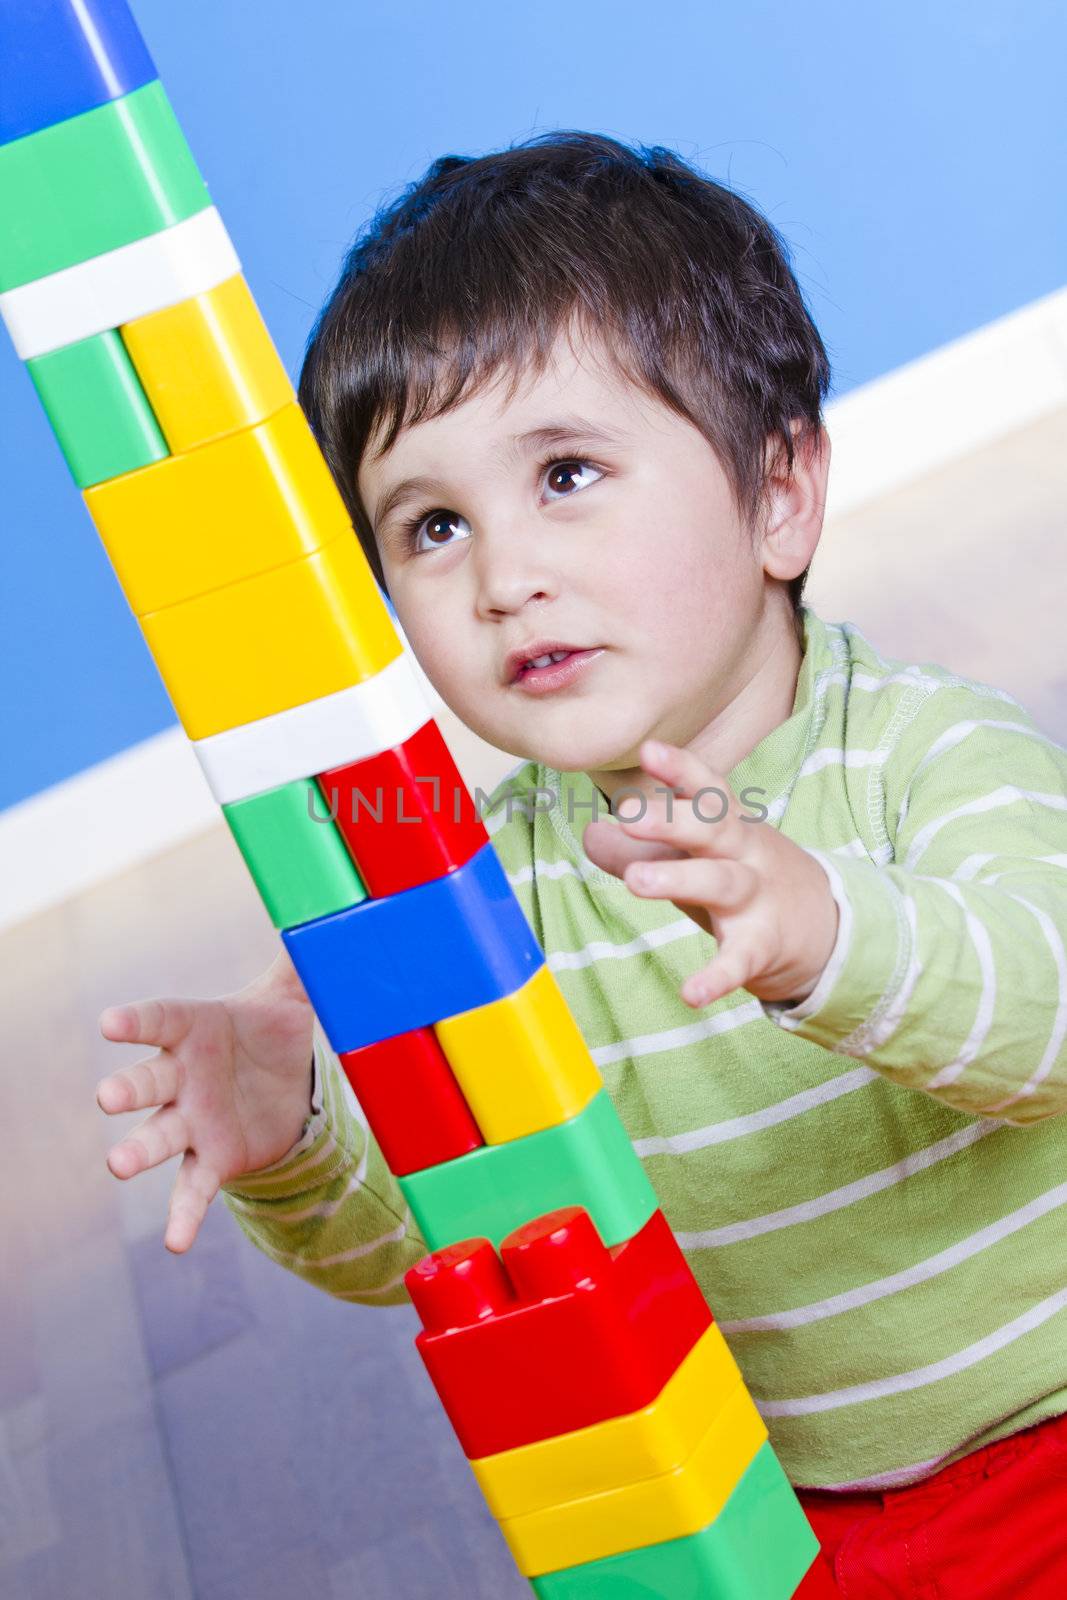 Funny little boy playing with plastic colorful blocks, studio shot